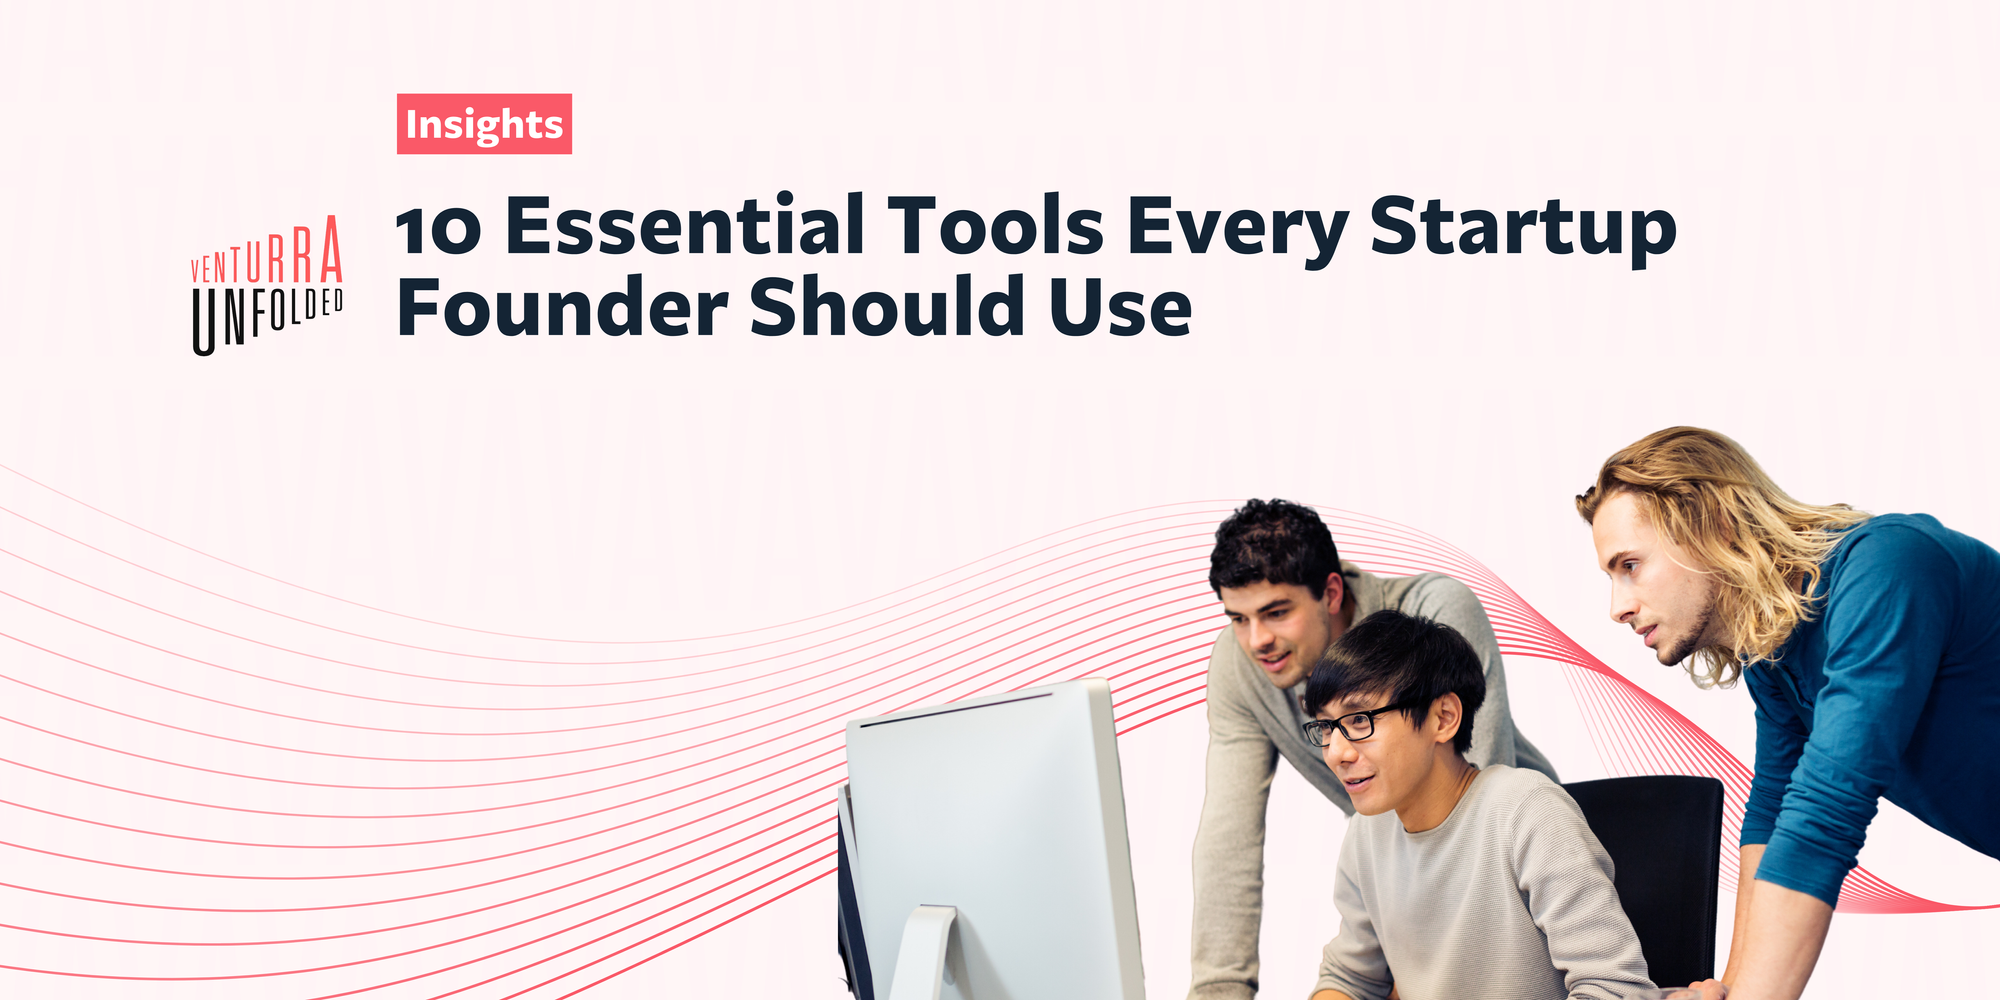 10 Essential Tools Every Startup Founder Should Use